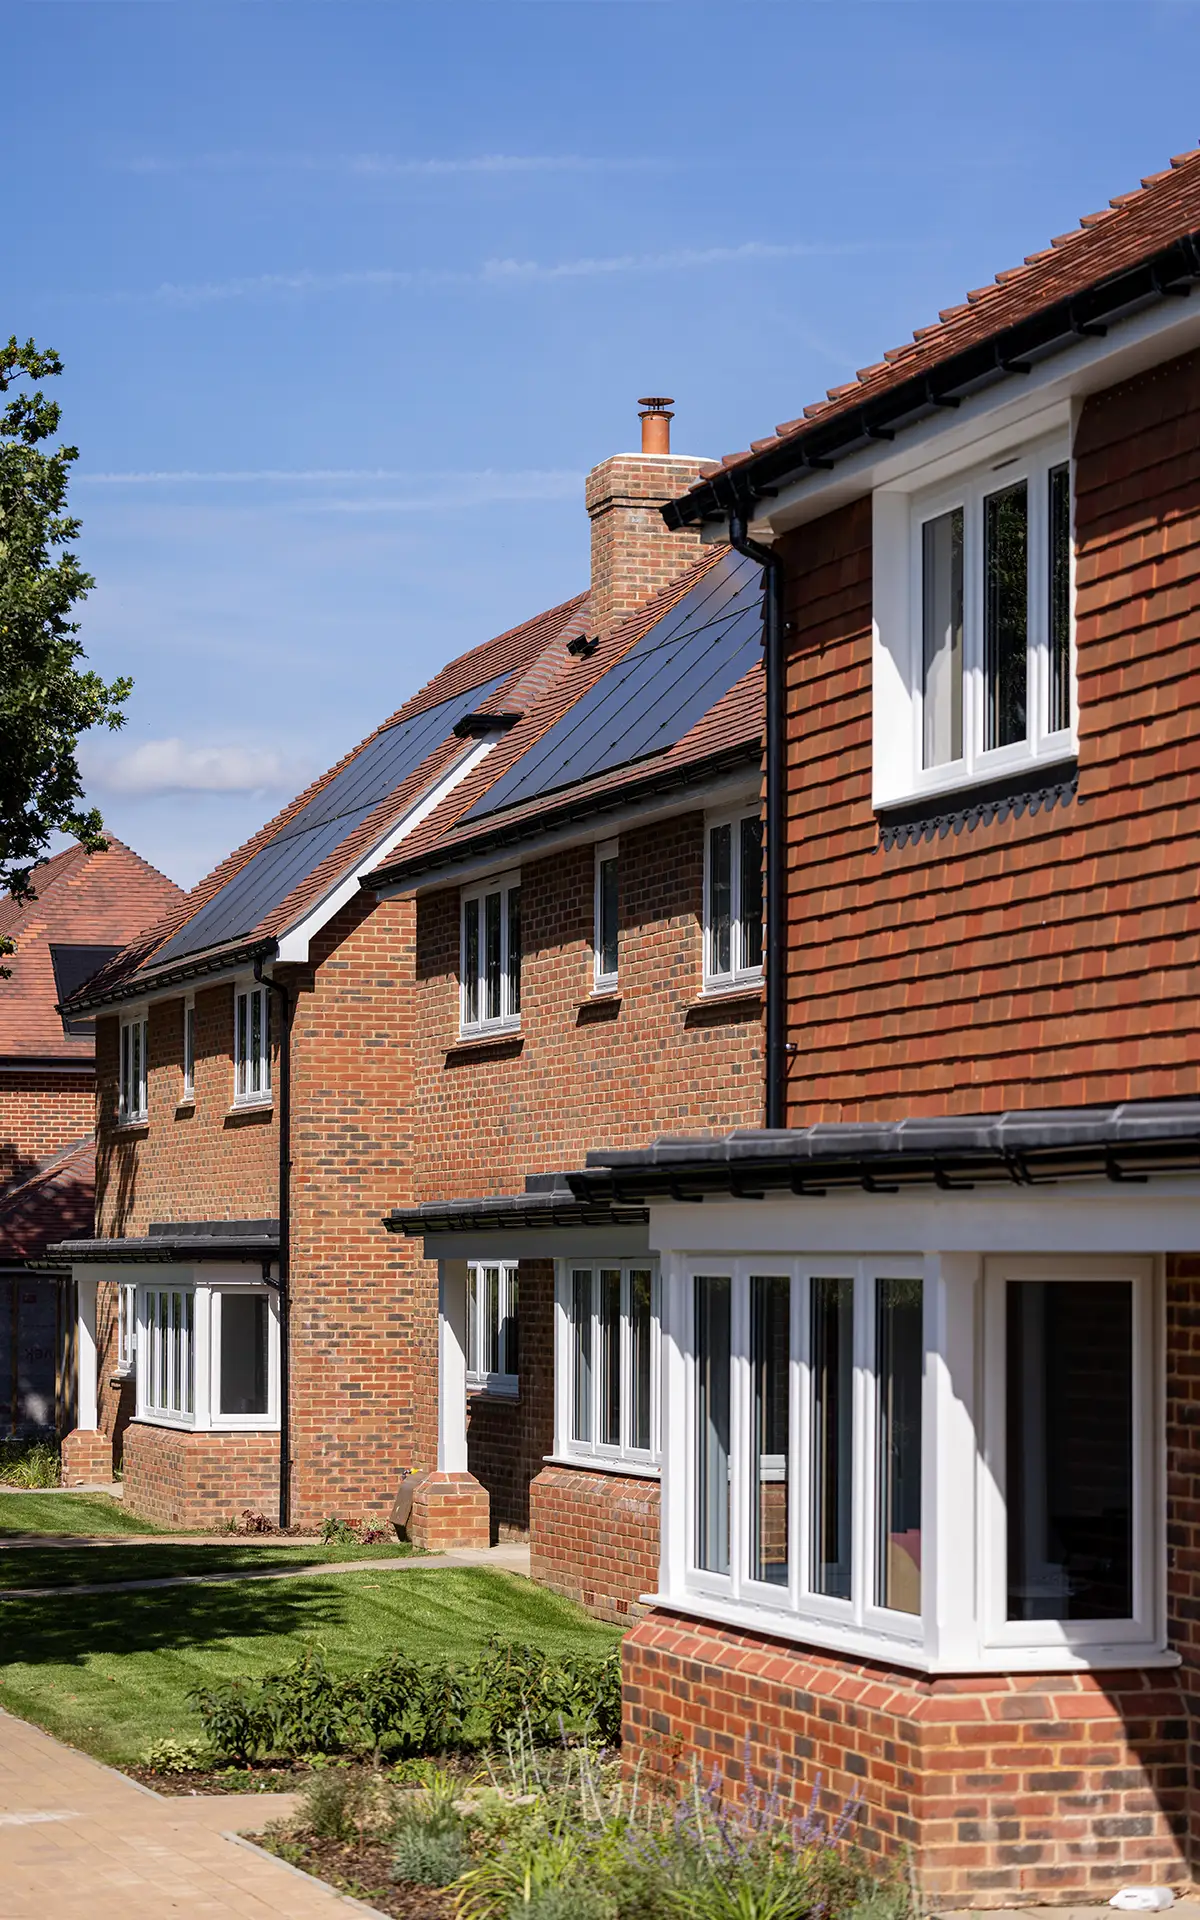 A row of three houses at Manorwood, West Horsley. Solar panels are found on each roof.